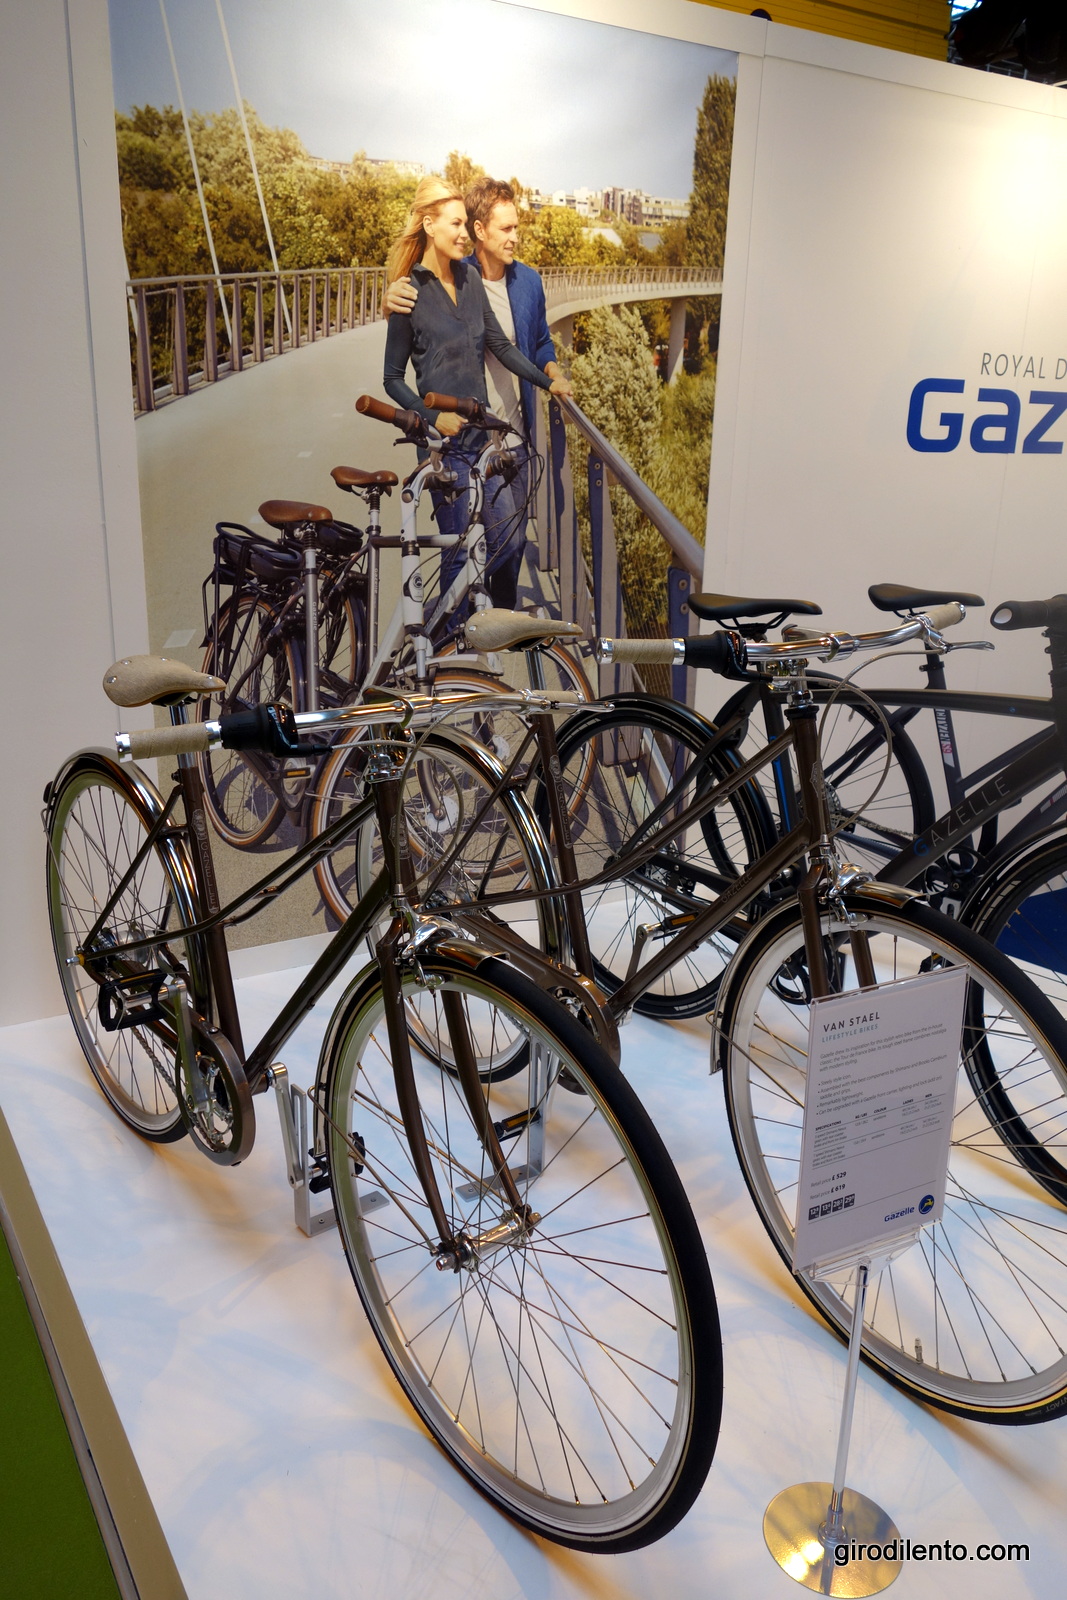 The Gazelle Van Stael Mixte Frame was really lovely. 